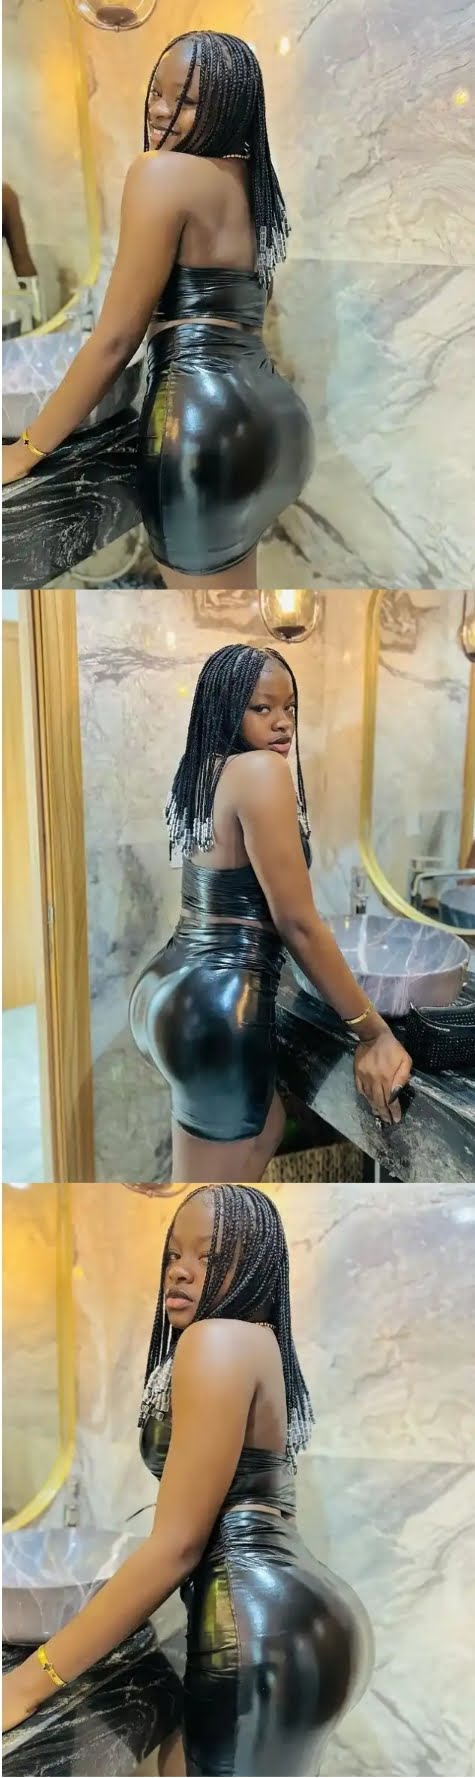 Shubomi , Naira Marley's sister, appears in several recent photos as a 'better version' of herself.